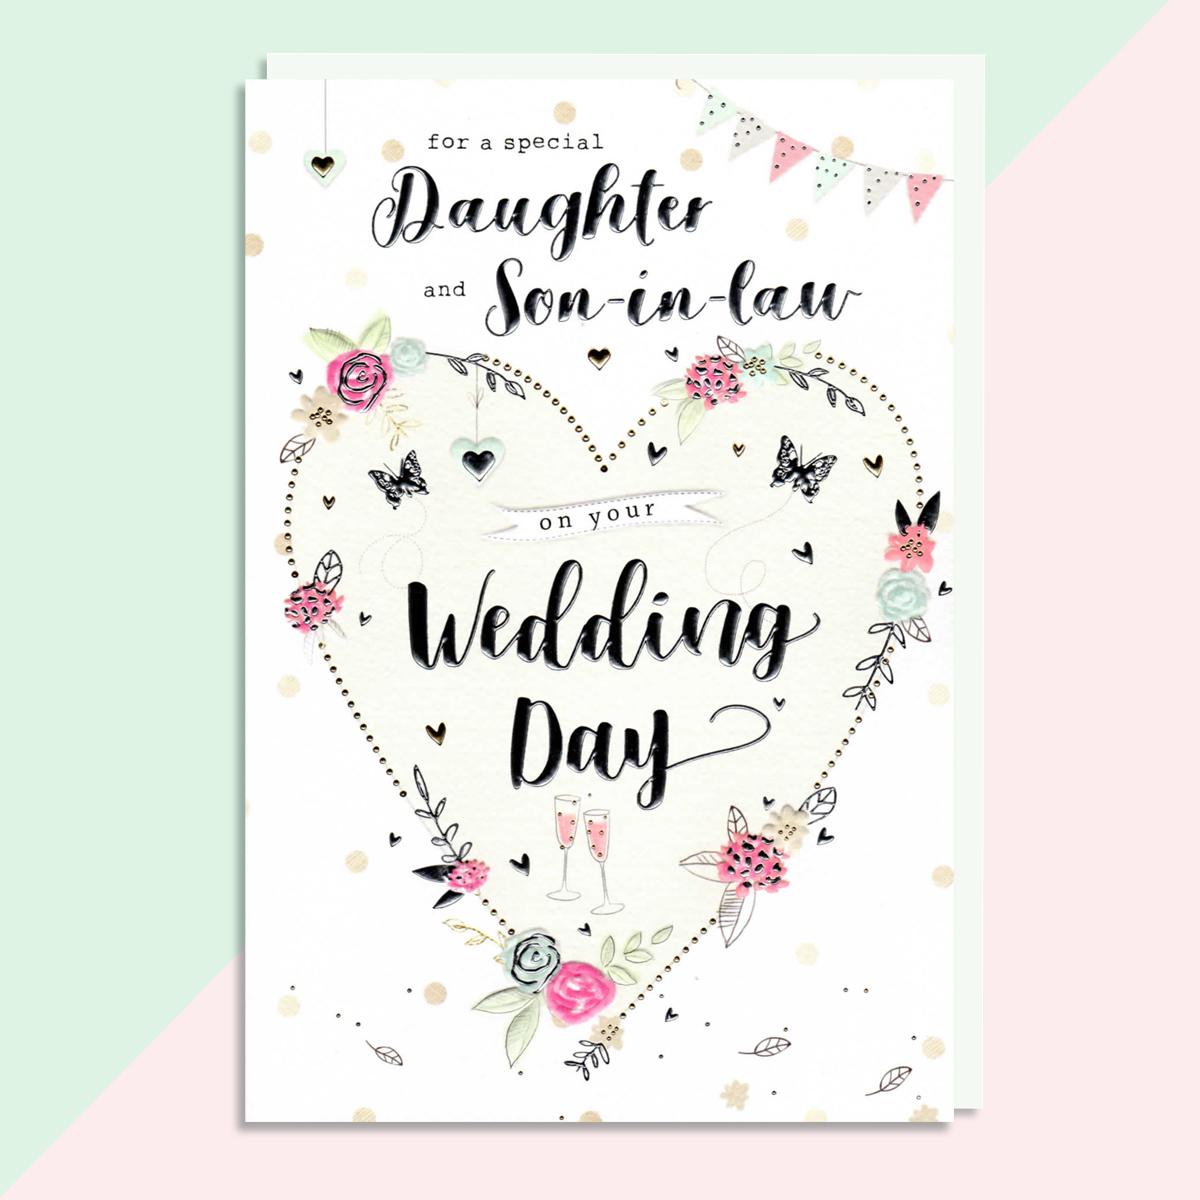 A Selection Of Cards To Show The Depth Of Range In Our Daughter And Son In Law Wedding Card Section